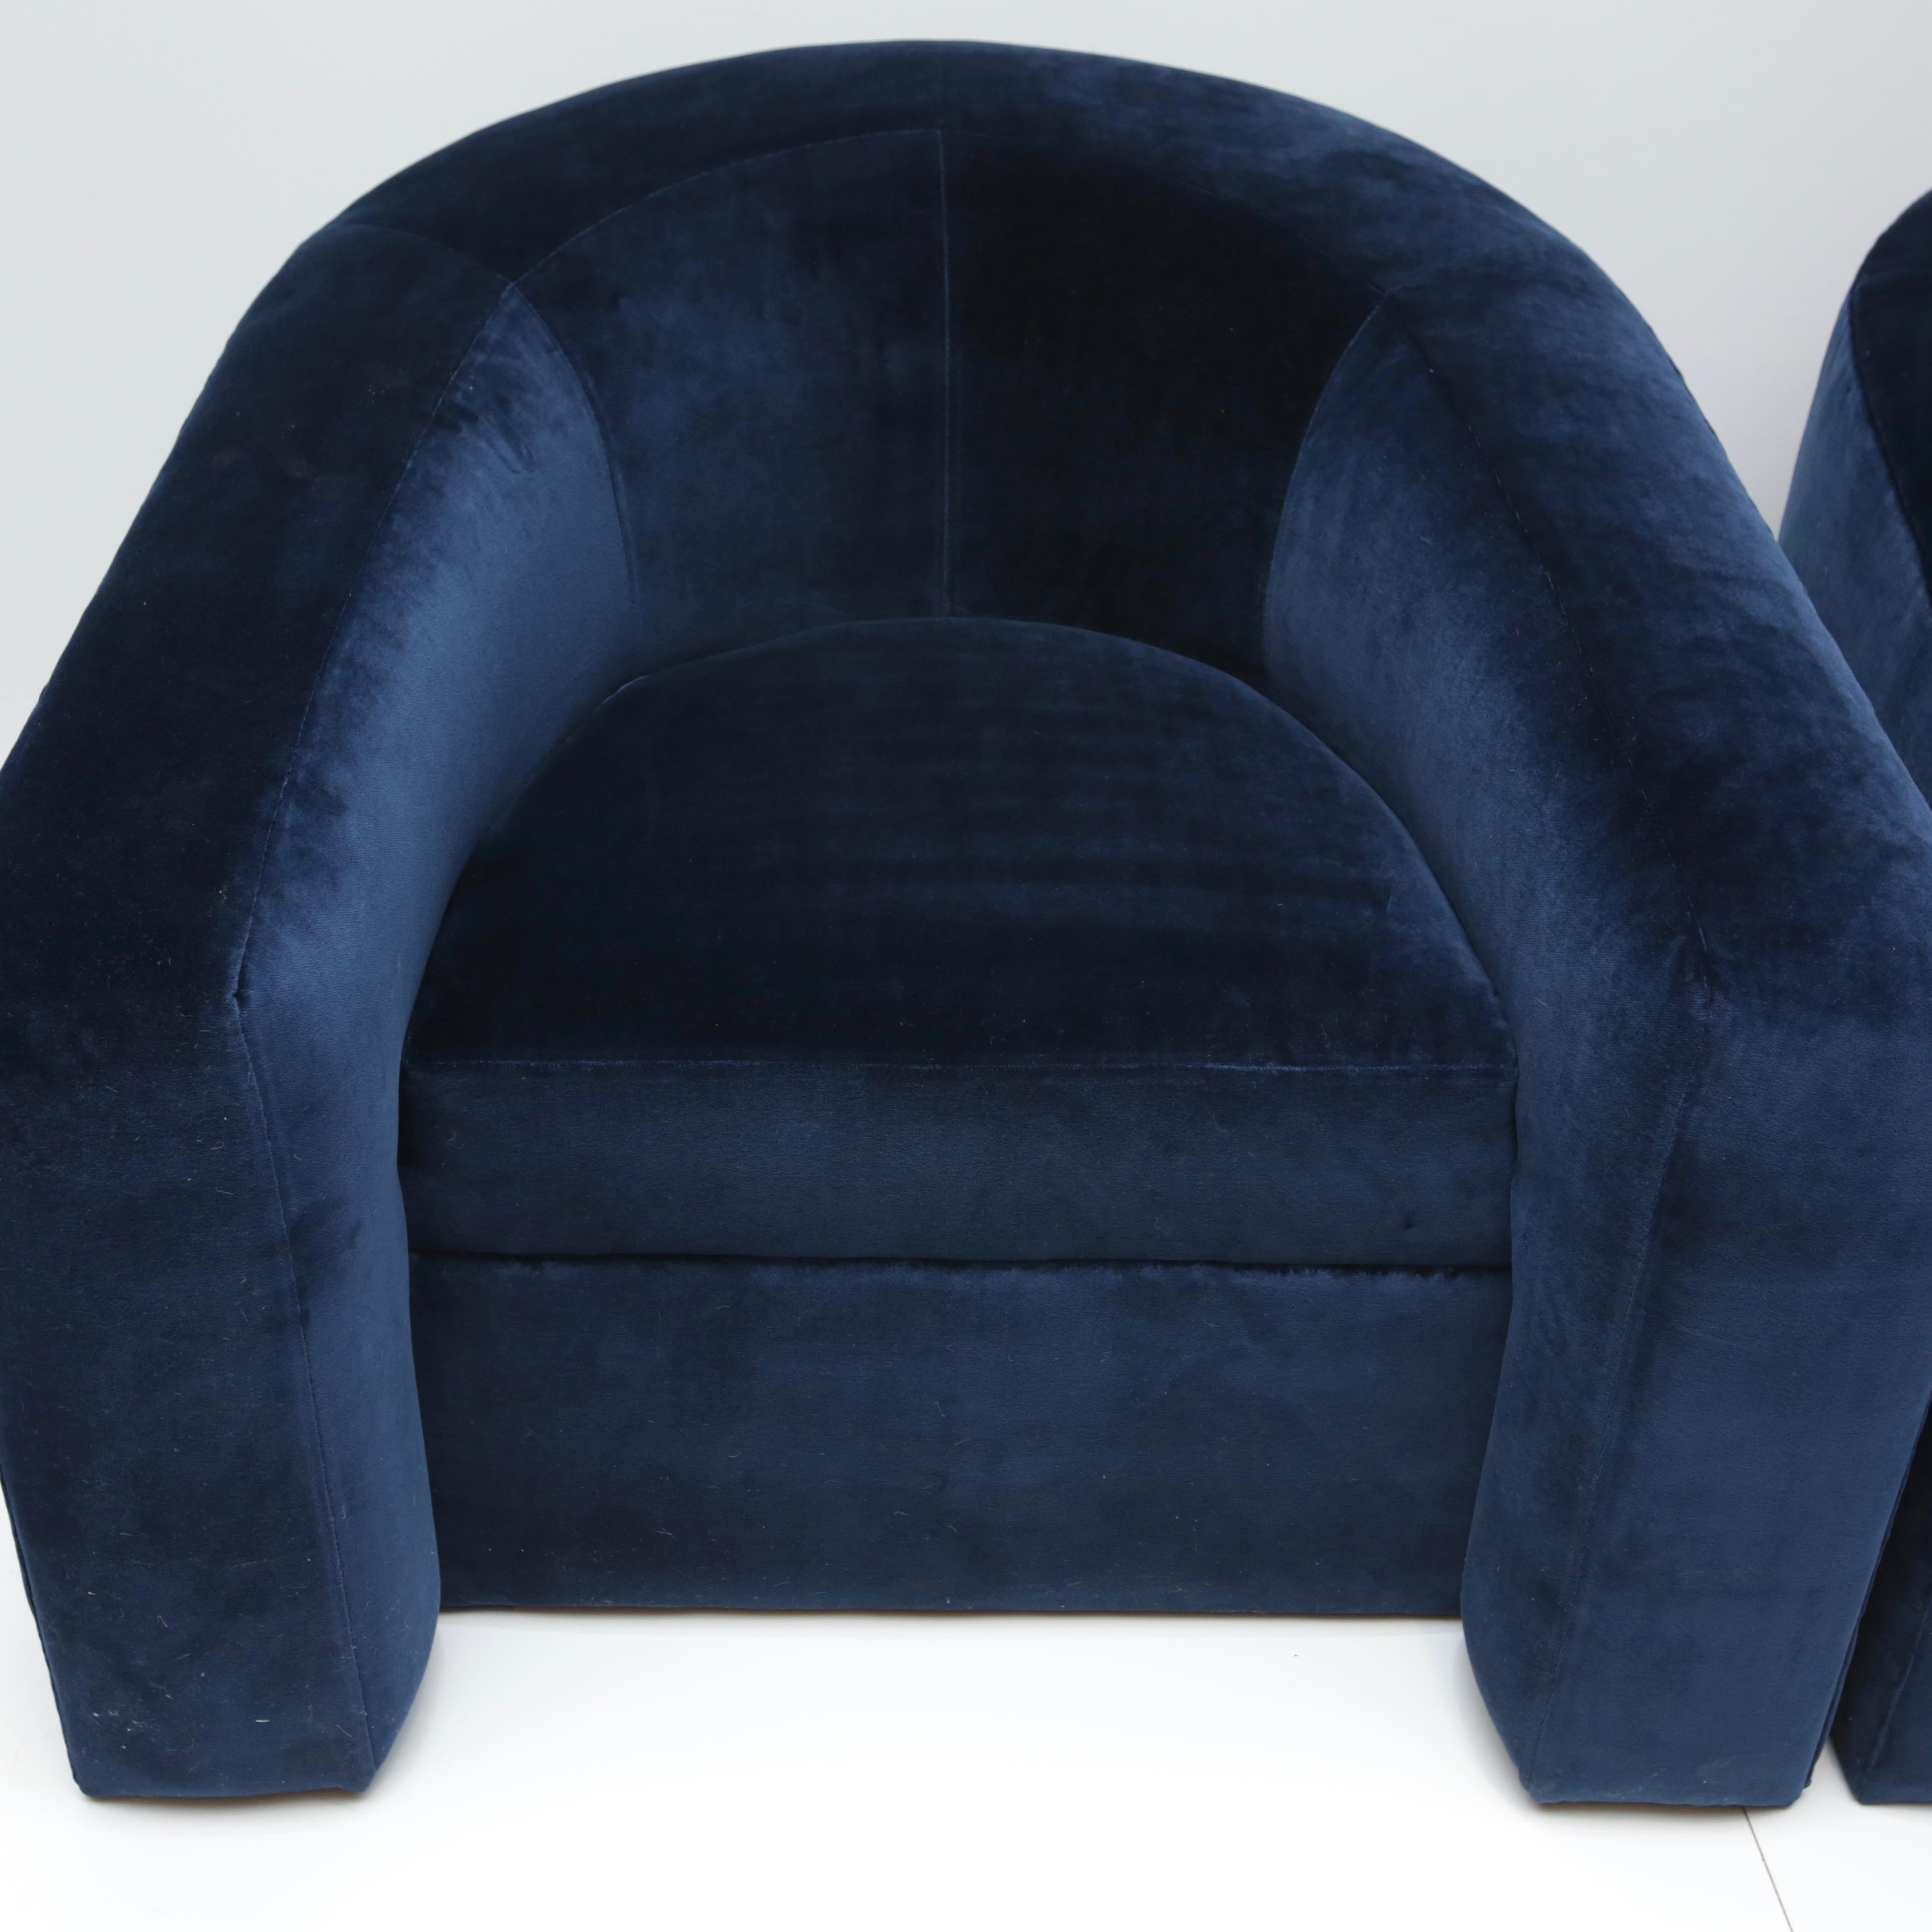 Super comfy tub chairs covered in deep navy blue Kravet cotton velvet. Chairs are modeled after the Donghia volume tub chair.